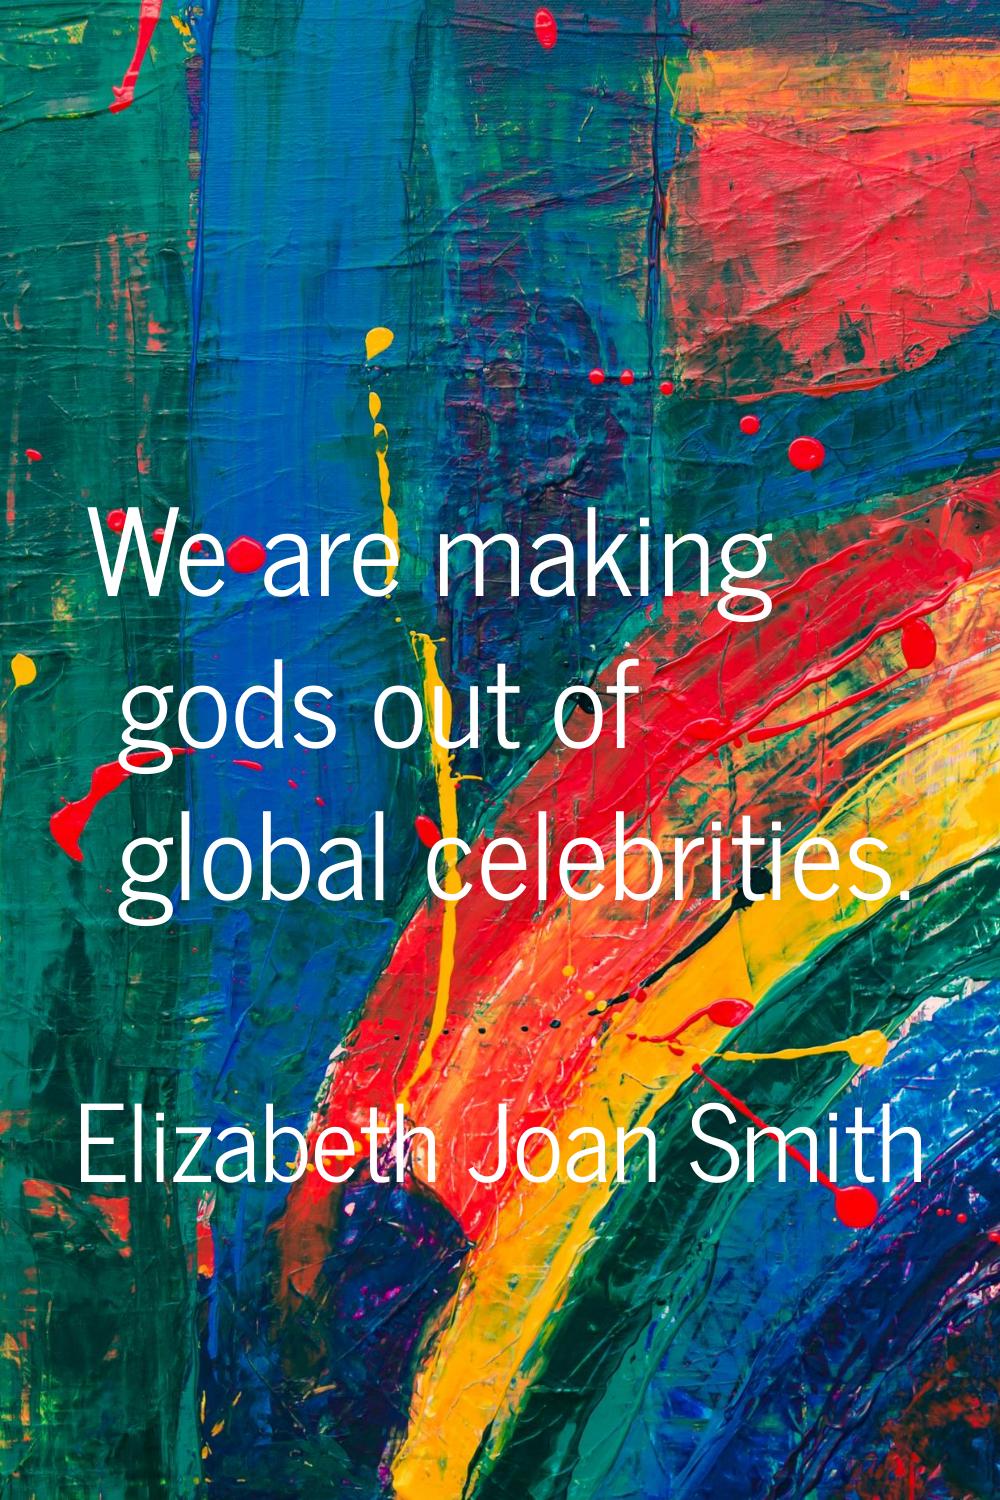 We are making gods out of global celebrities.